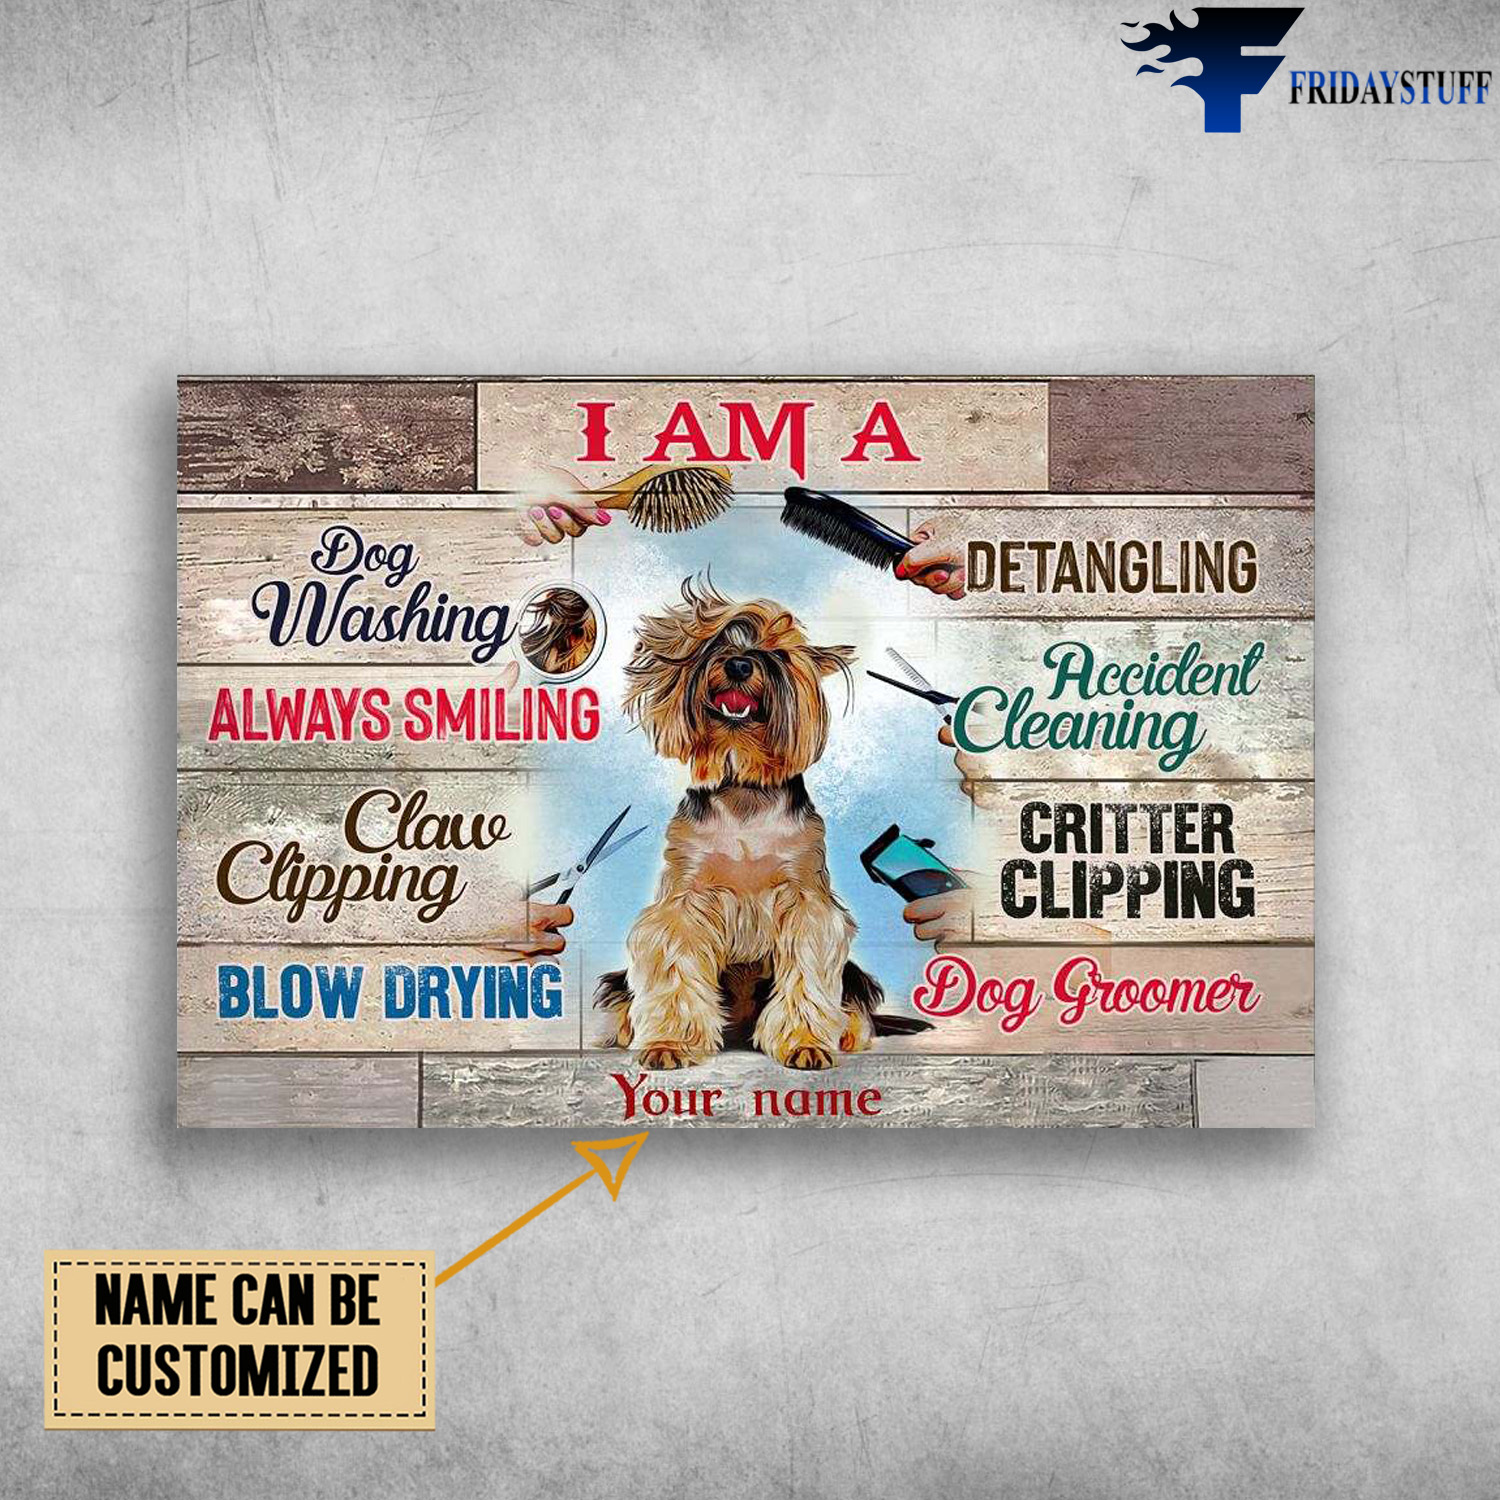 I Am Dog Washing, Dog Groomer, Detangling, Accident Cleaning, Claw Clipping, Critter Clipping, Blow Drying